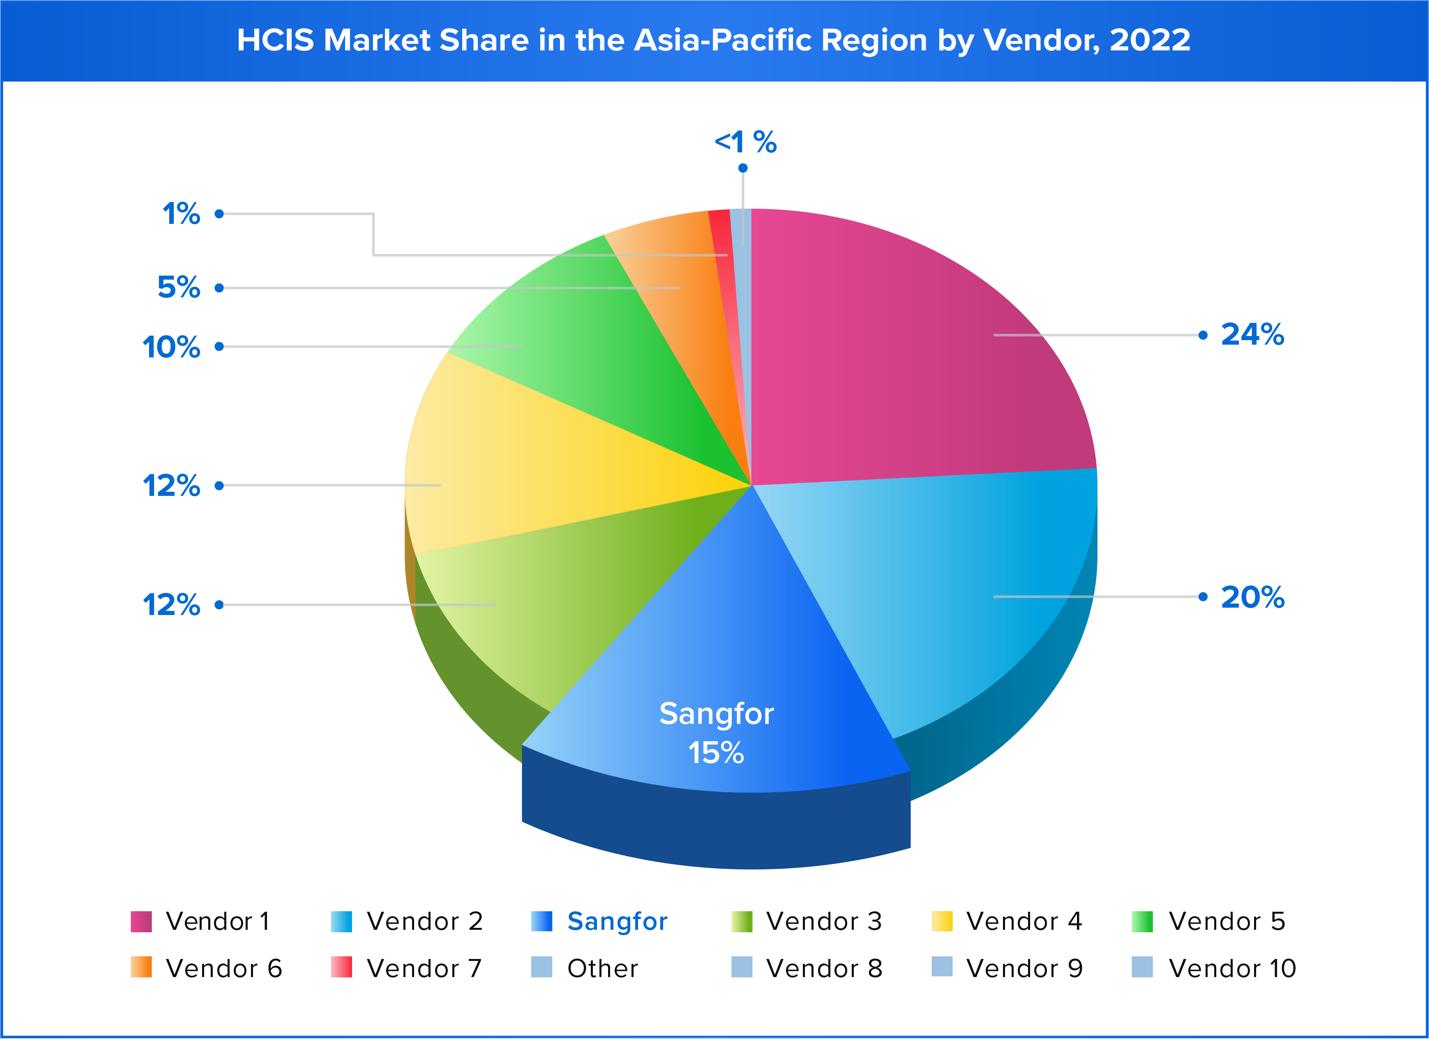 HCIS Market Share in the Asia-Pacific Region by Vendor, 2022